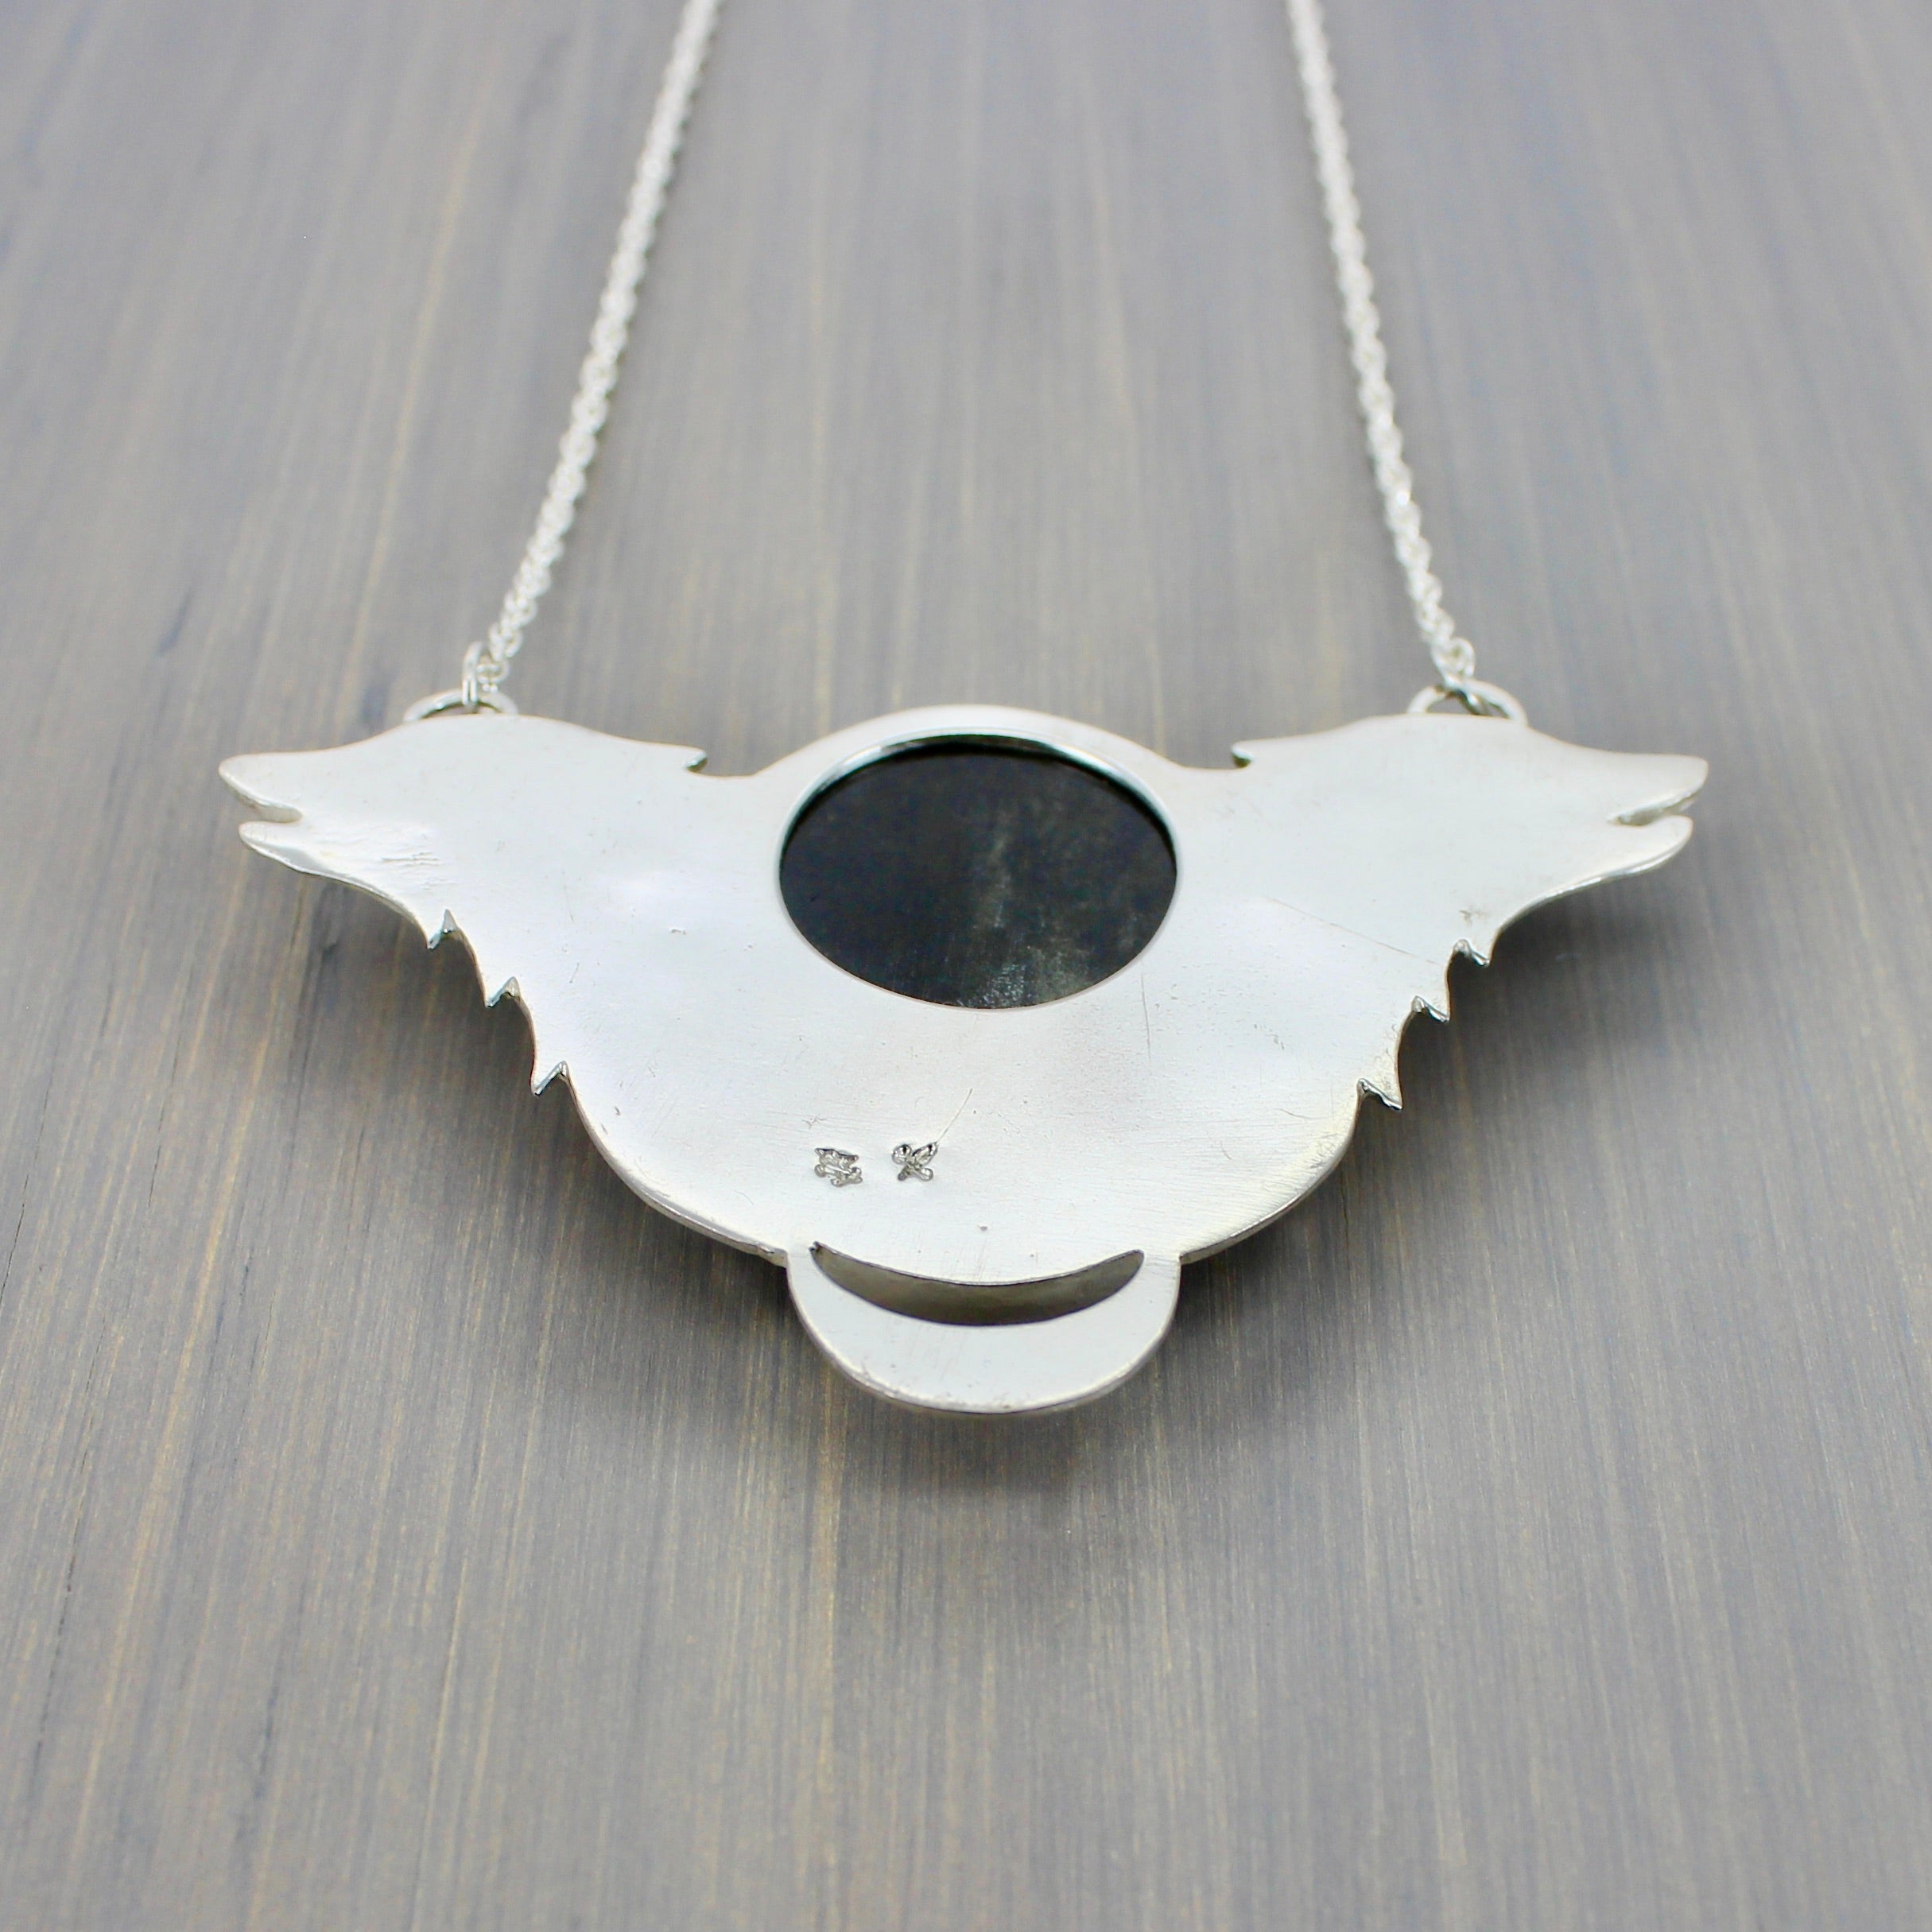 Wolfheart in Obsidian Necklace